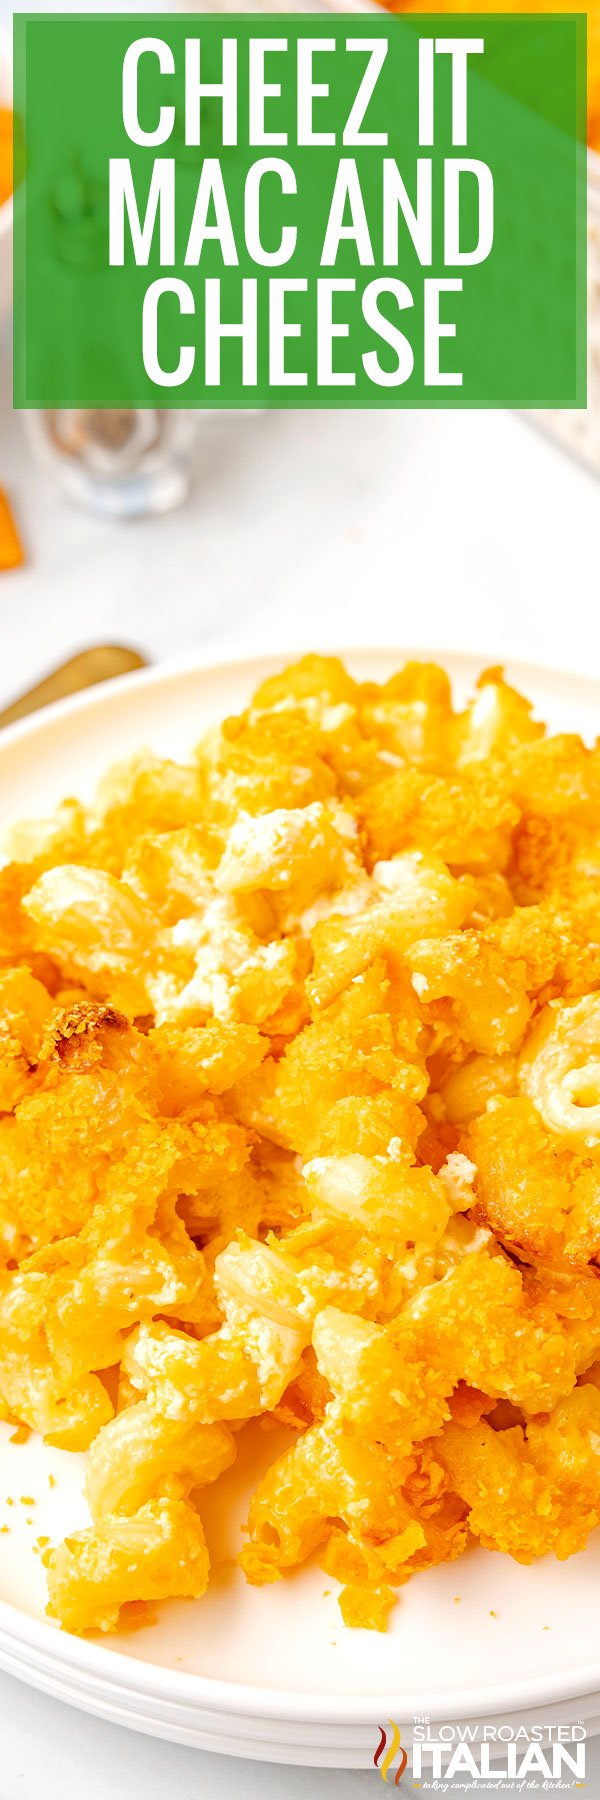 cheez it mac and cheese recipe.